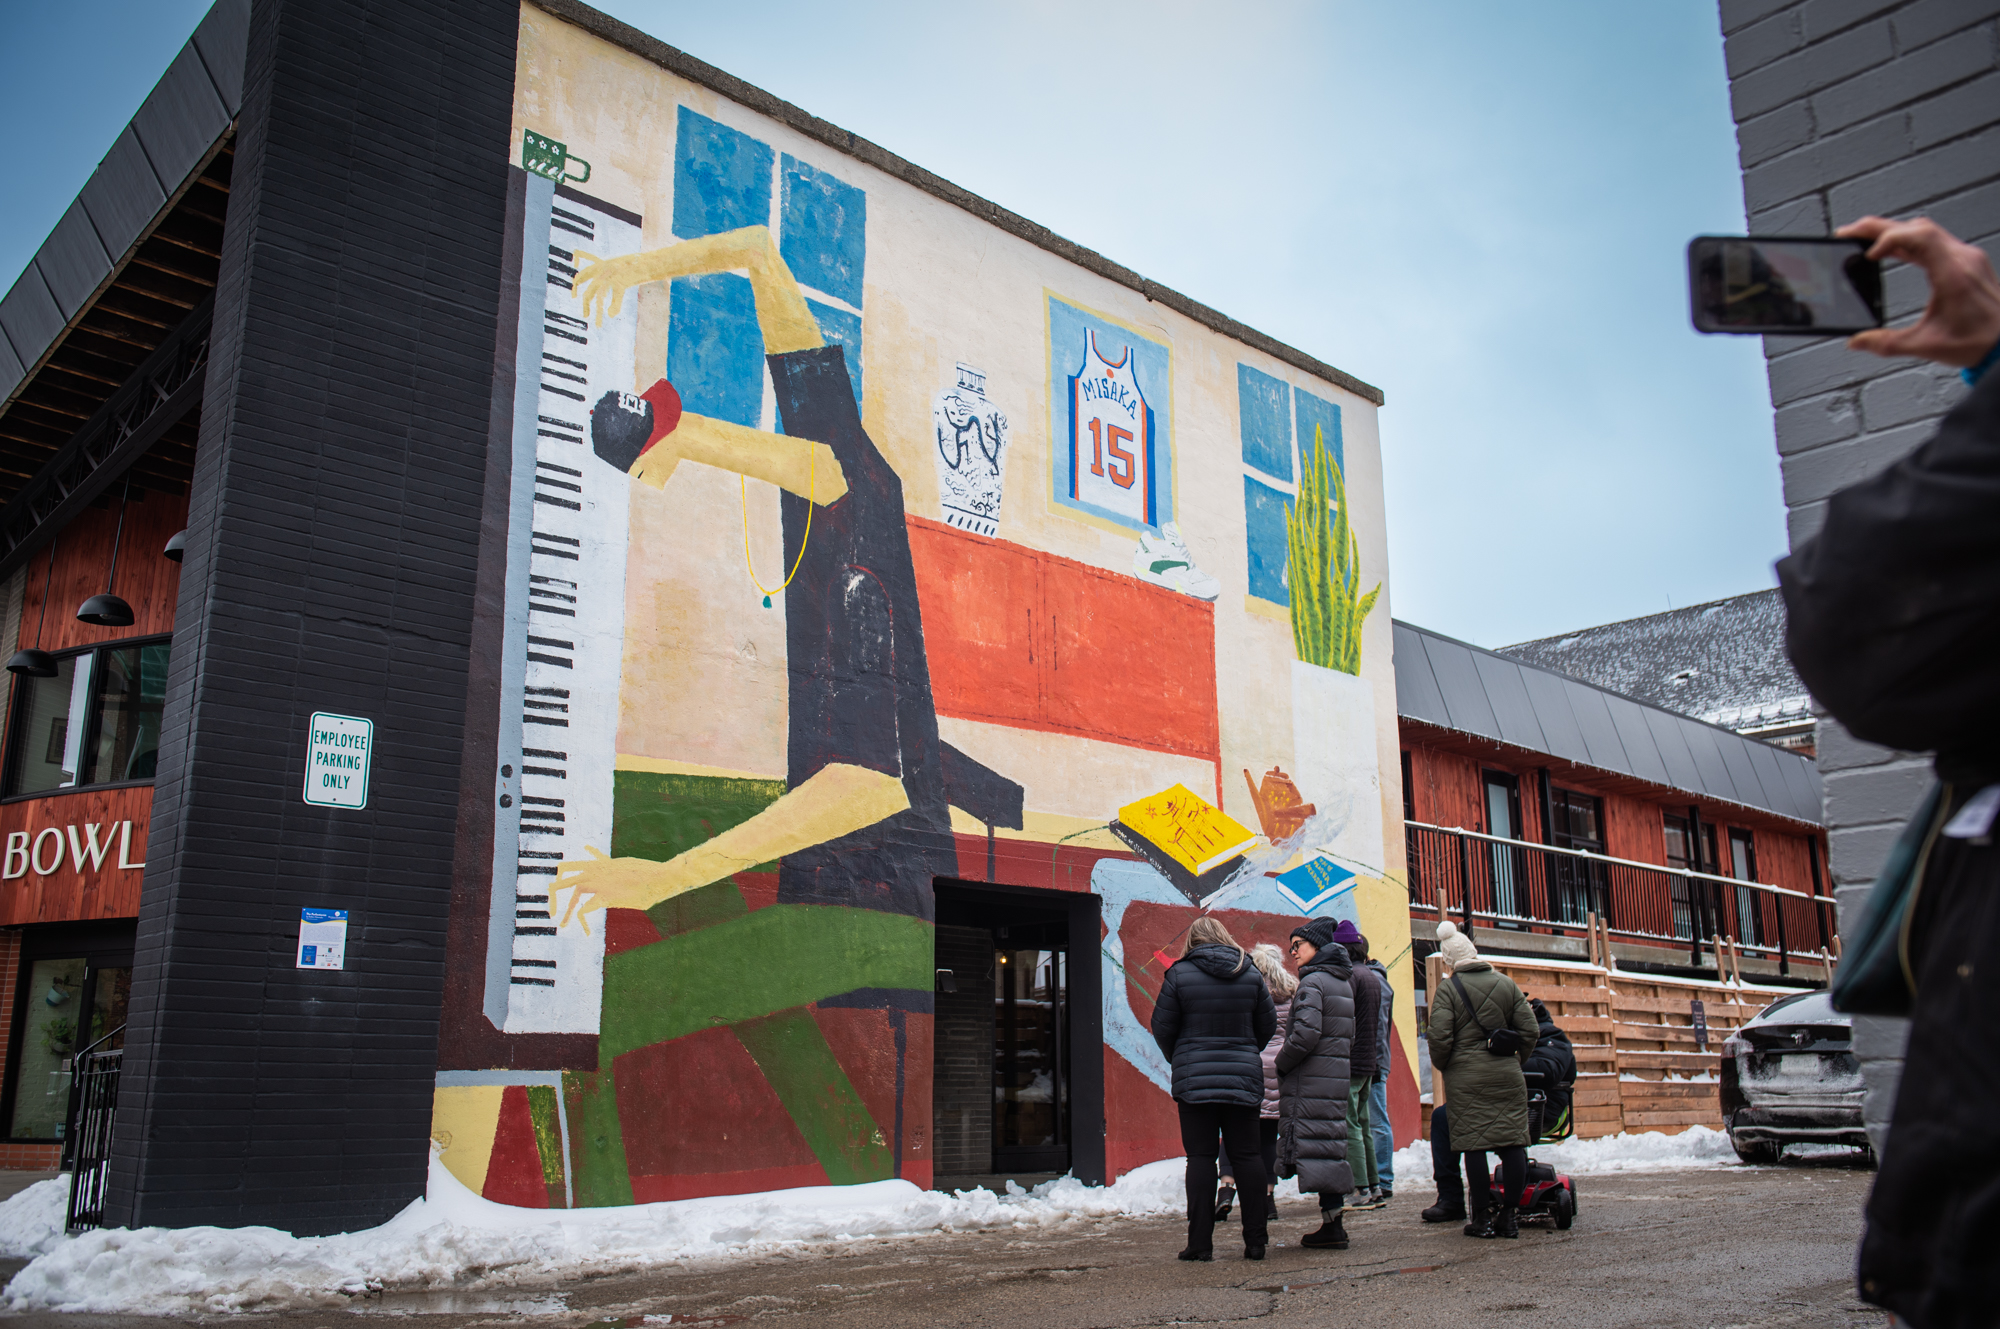 Members of the Downtown Stratford BIA gather under "The Perfectionist" mural by Kellen Hatanaka